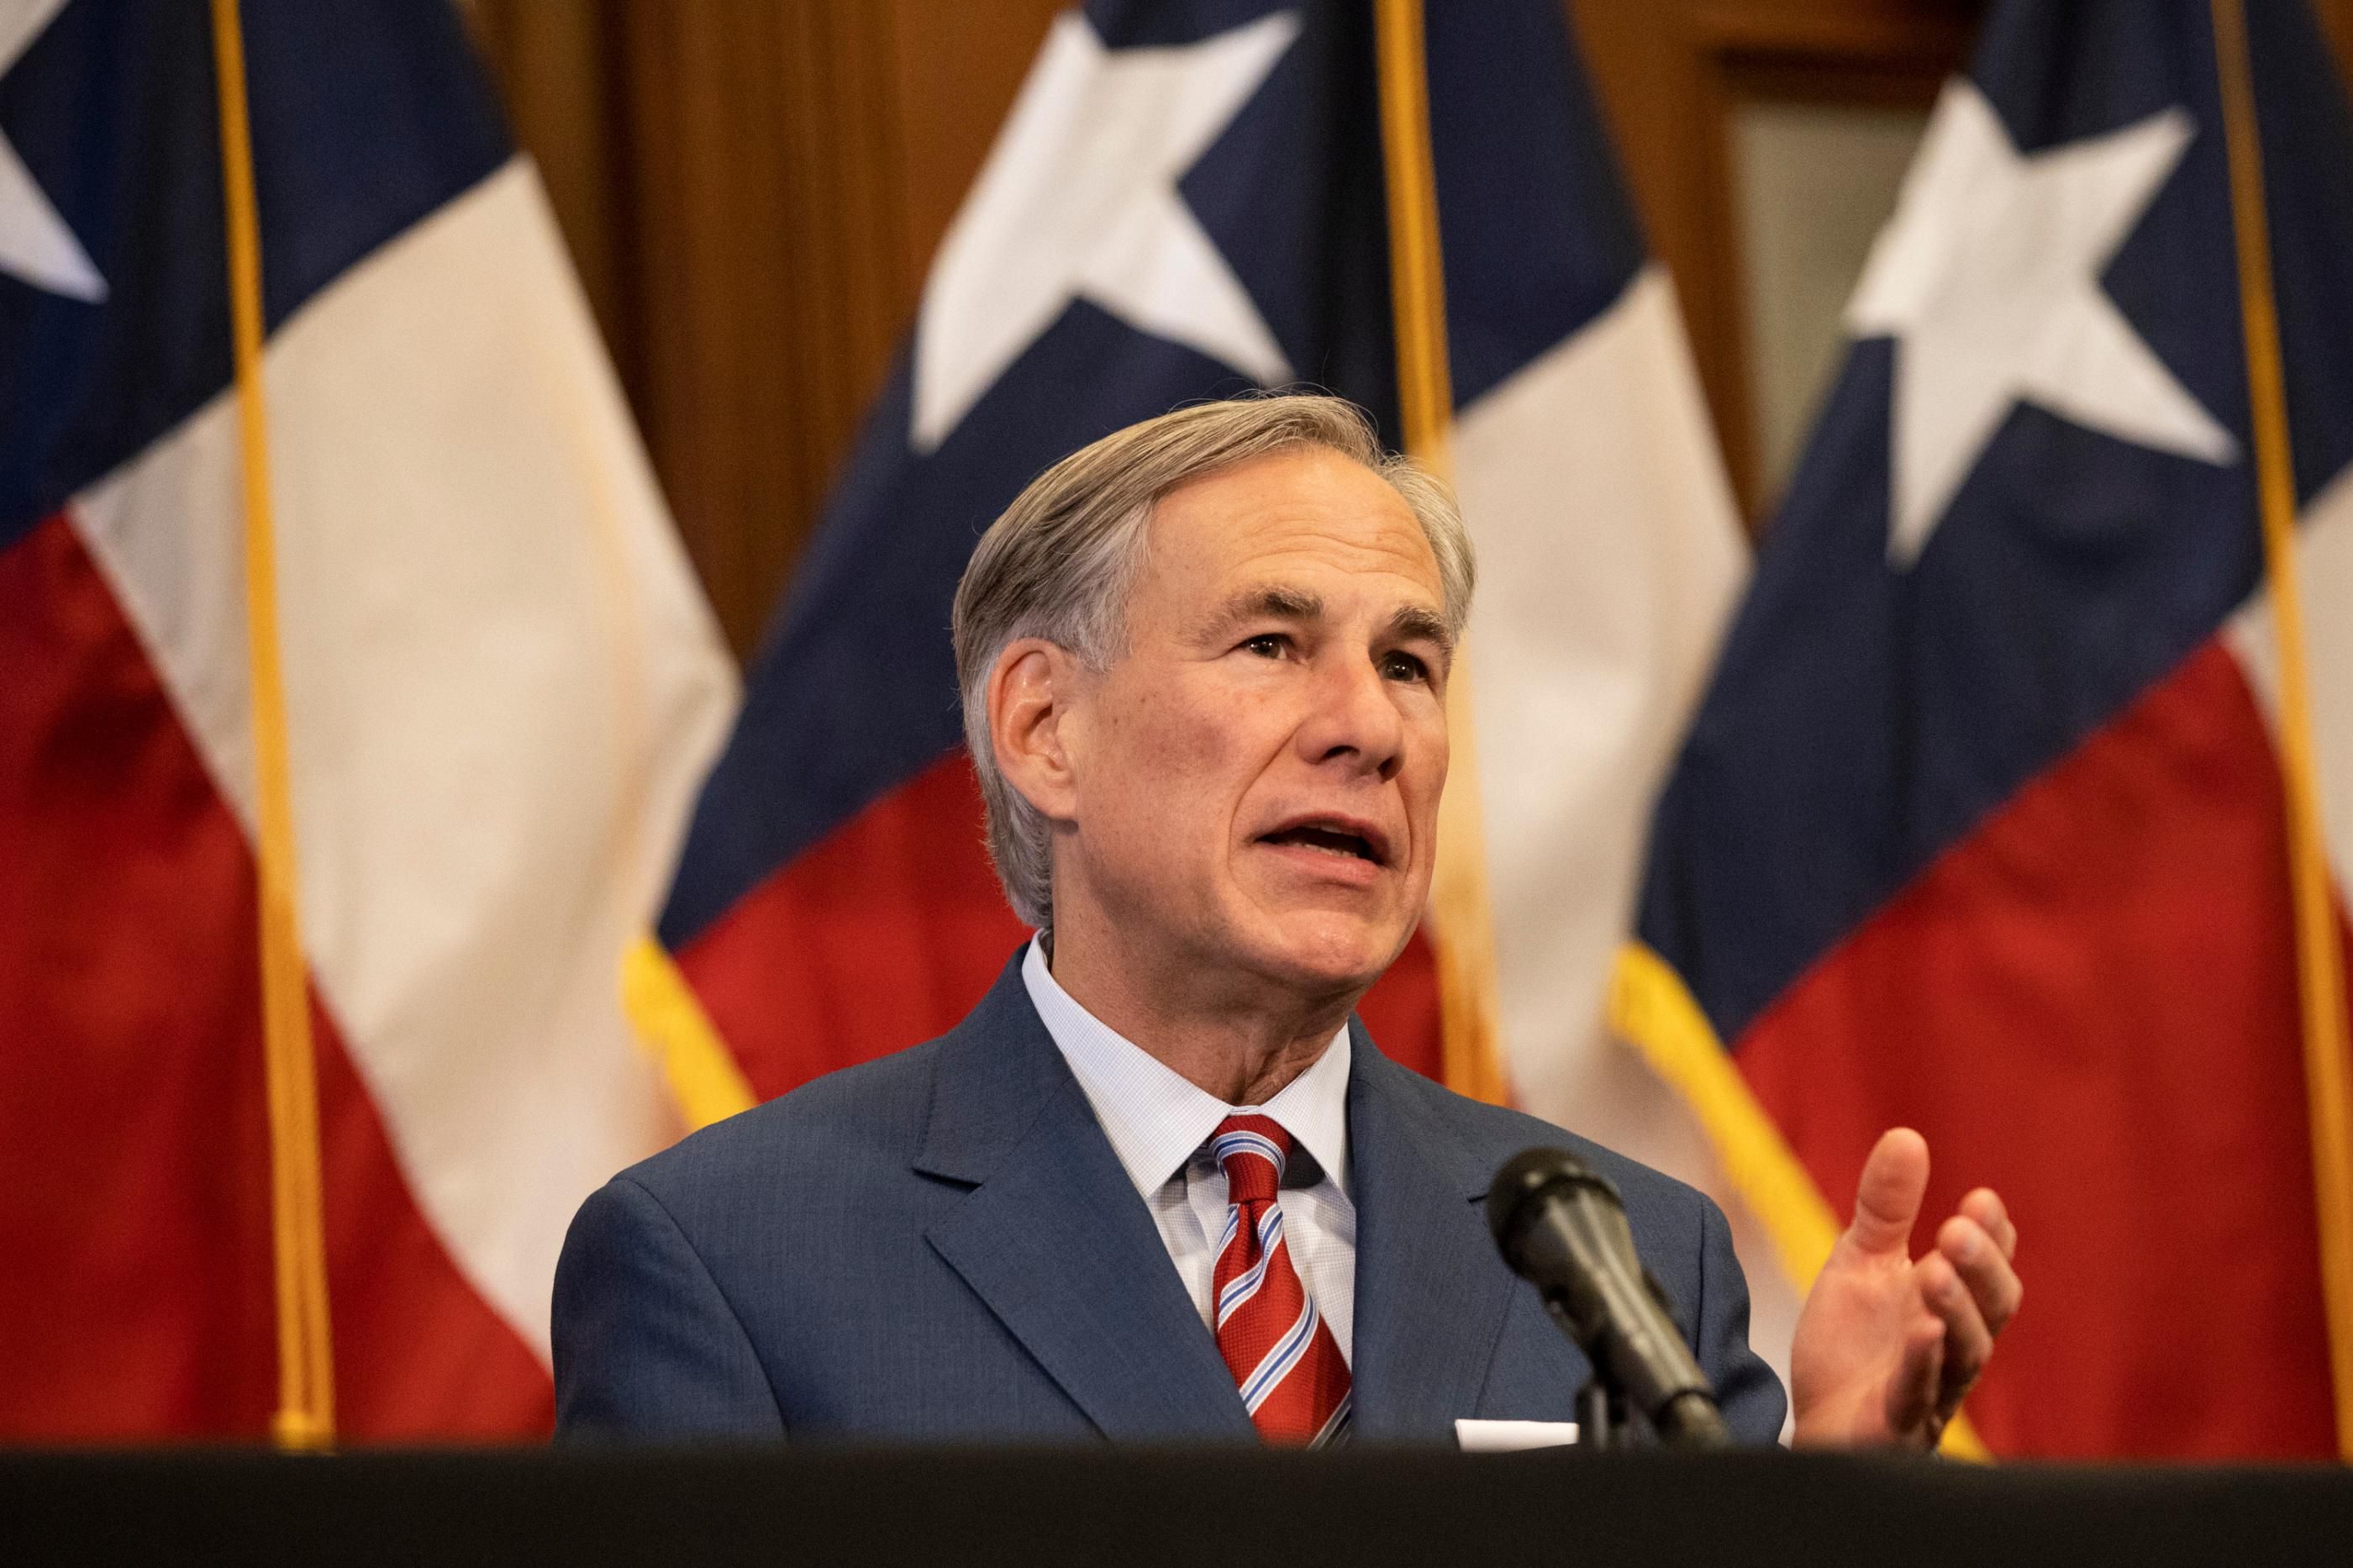 Texas Gov. Greg Abbott announces the reopening of more Texas businesses during the Covid-19 pandemic at a press conference at the Texas State Capitol in Austin on May 18, 2020. (Photo: Lynda M. Gonzalez-Pool via Getty Images)